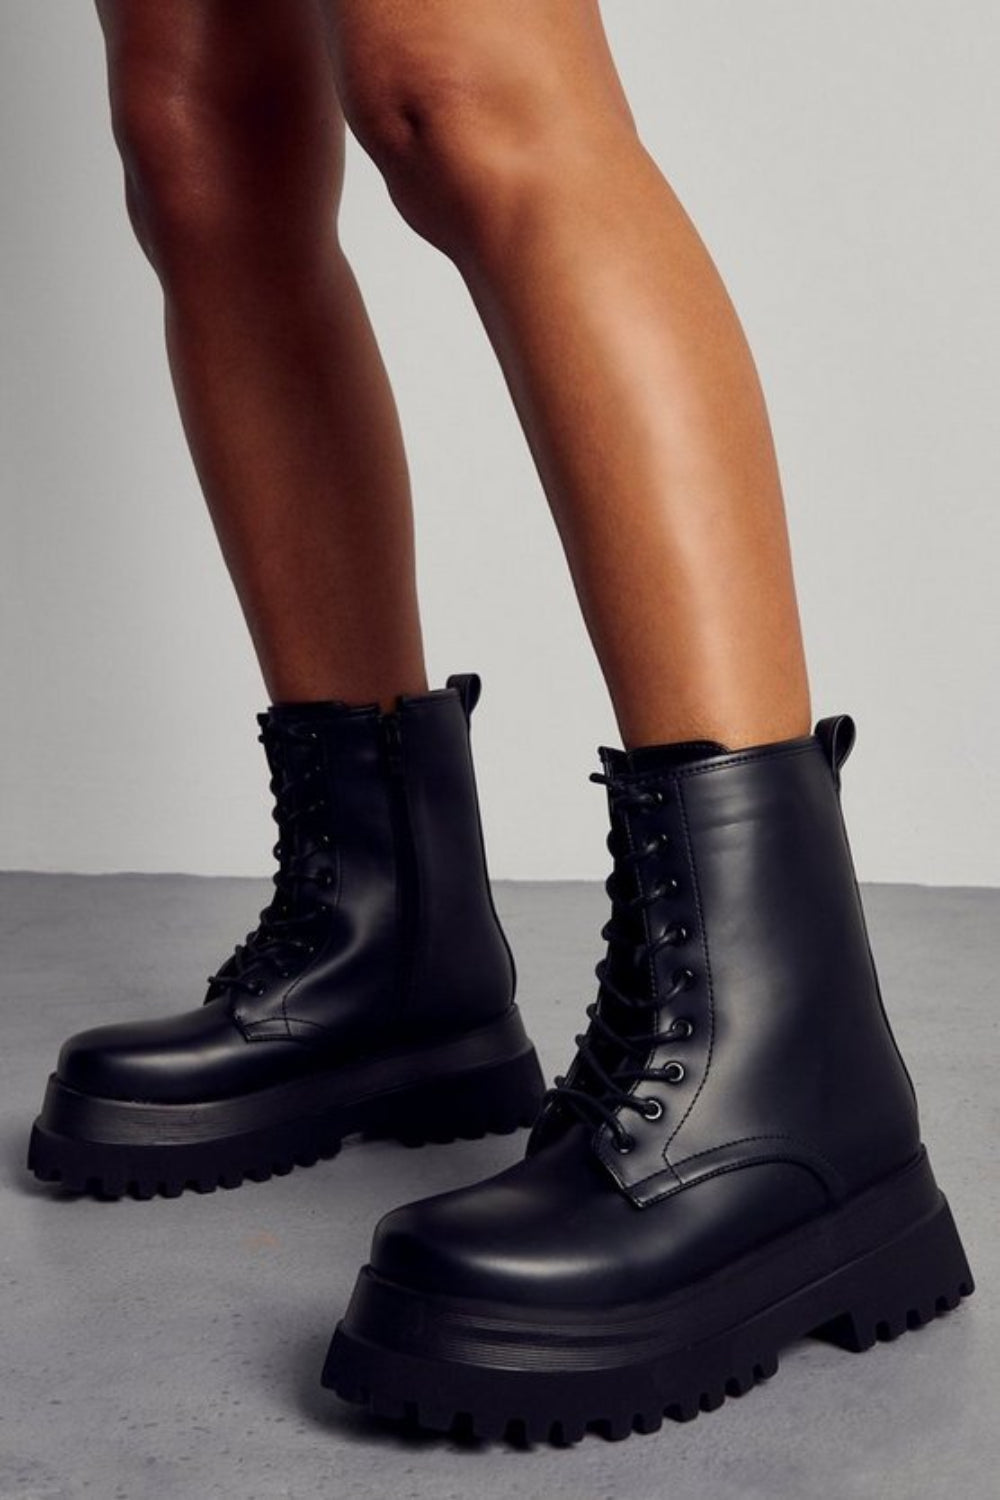 BLACK PU CHUNKY PLATFORM ANKLE FRONT LACE UP BOOT